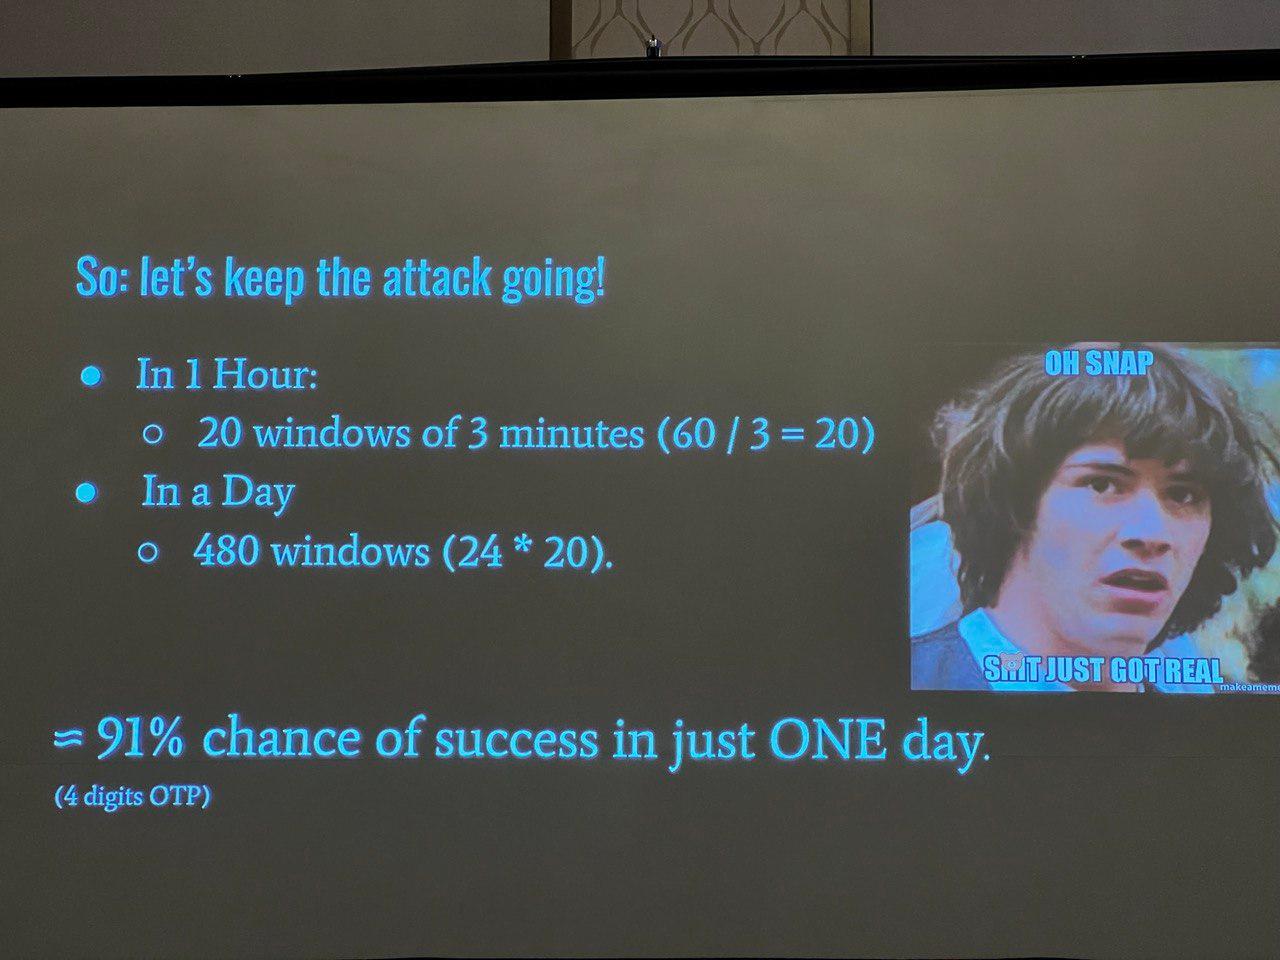 A photo of a presentation that reads So let's keep the attack going. In one hour, 20 windows of 3 minutes is 20. In a day, 480 windows. 91% chance of success in ONE day for a 4 digit O T P.